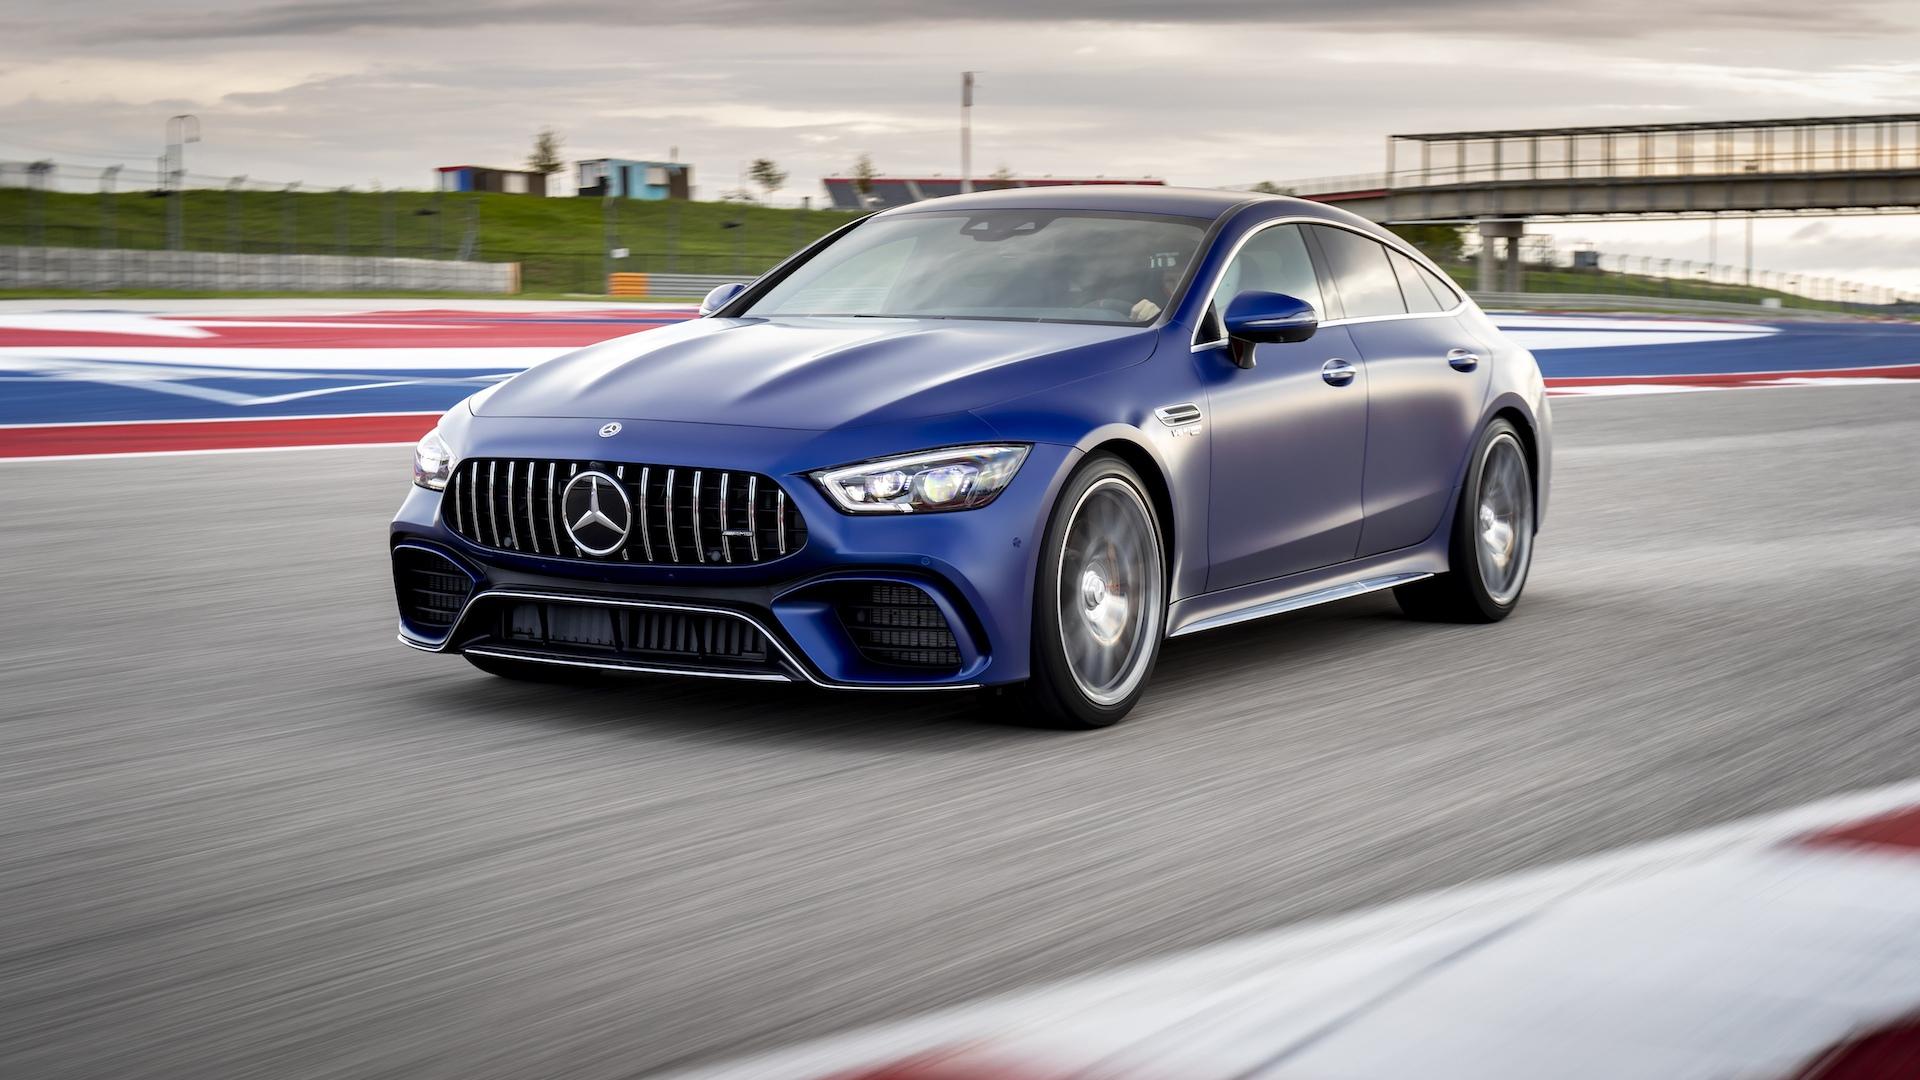 Mercedes AMG GT 63 S 4 Door Coupe First Drive Review